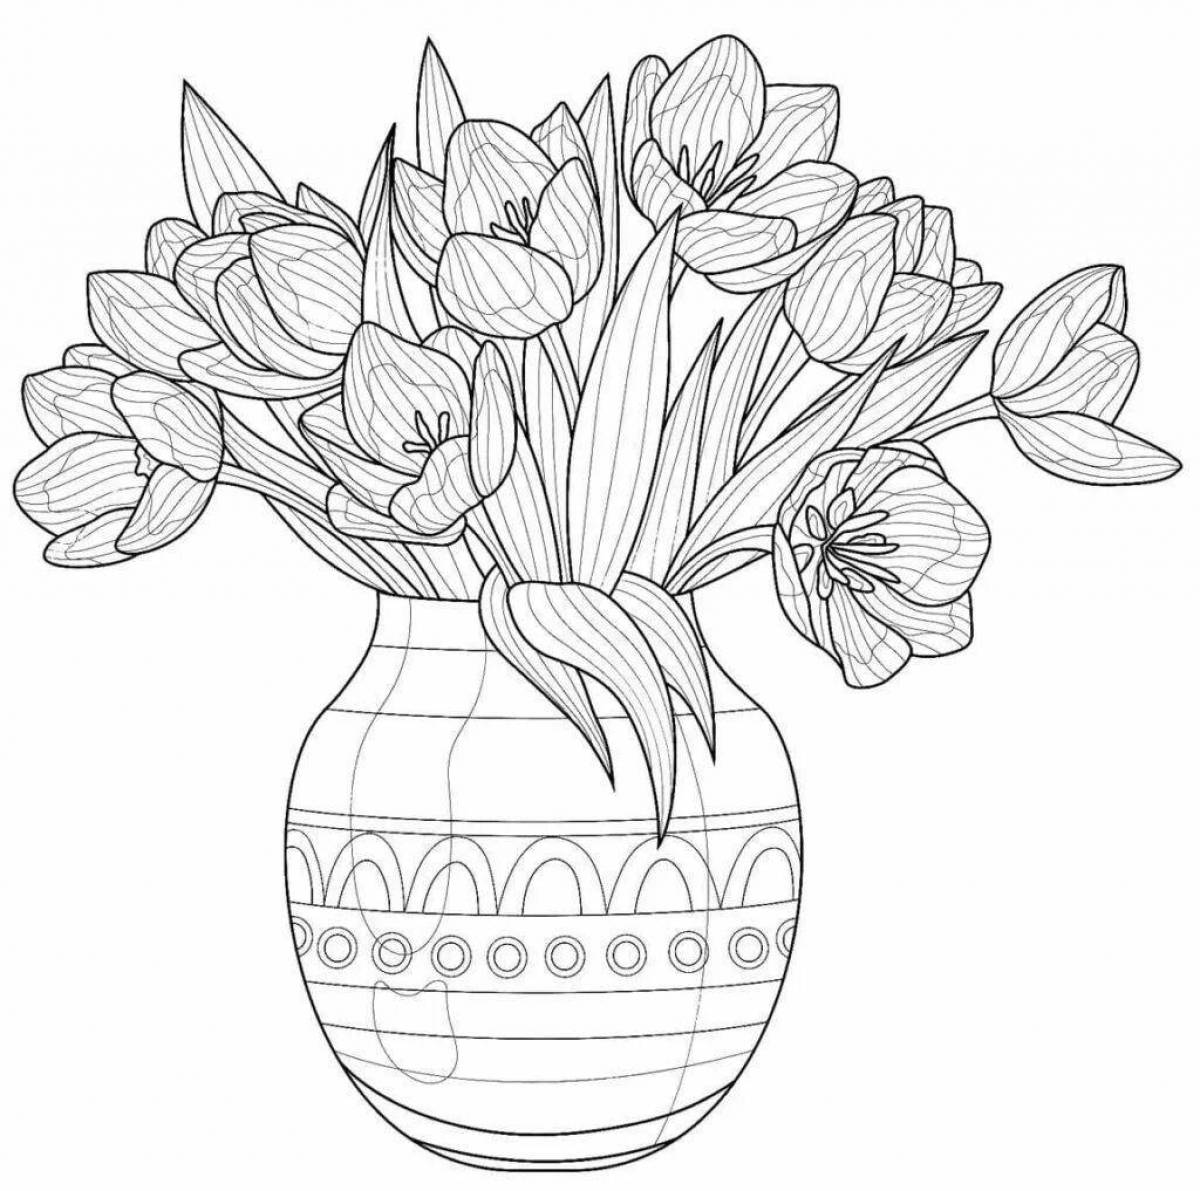 Coloring book sparkling tulips for March 8